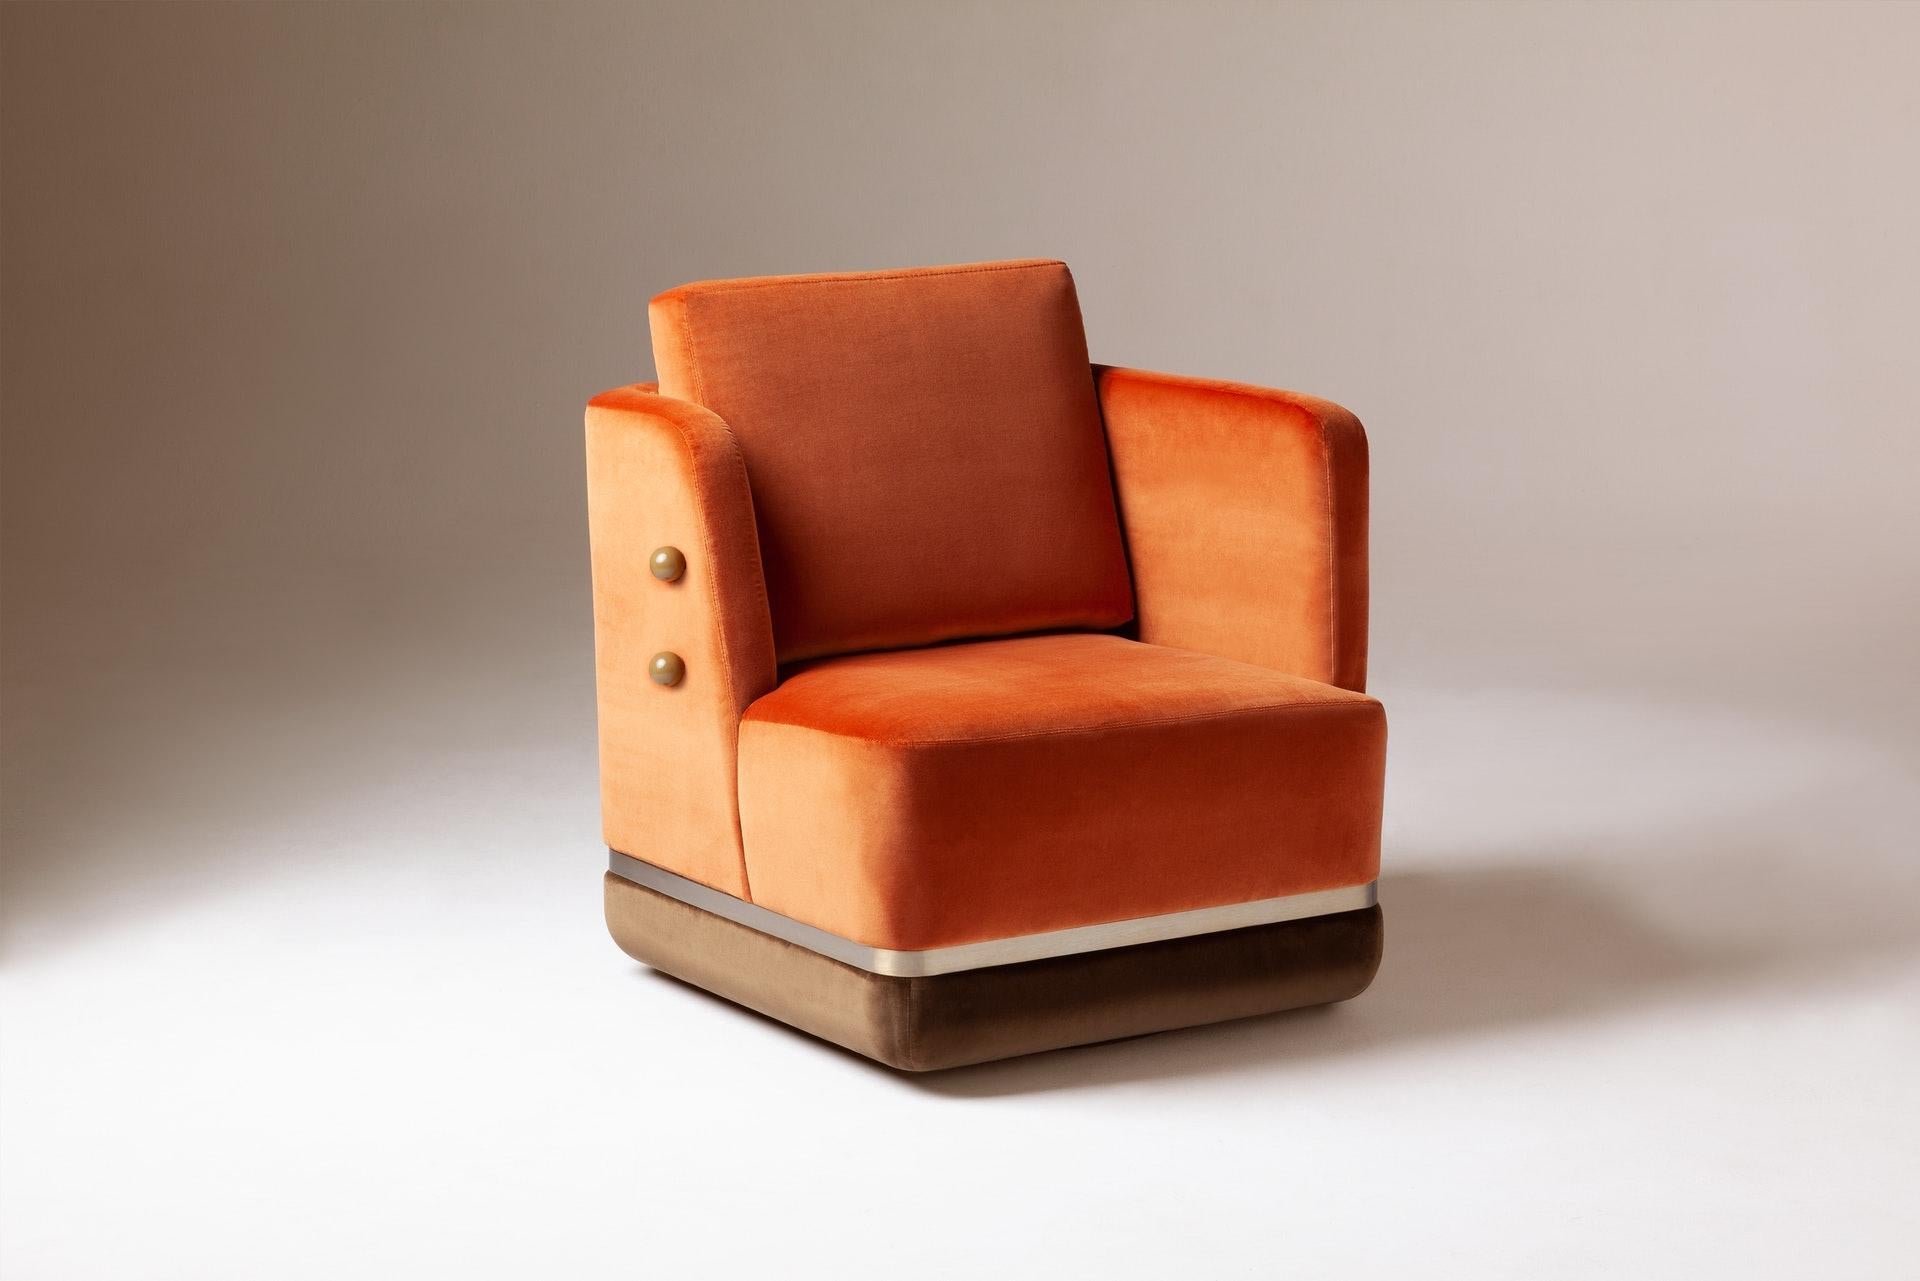 Swivel armchair with soft 100% cotton Orange and Brown velvet by Pierre Frey and satin brass detail. New and made to order.

Born in Portugal, Dooq is a design company dedicated to celebrate the luxury of living.
Our studio focuses on an extensive